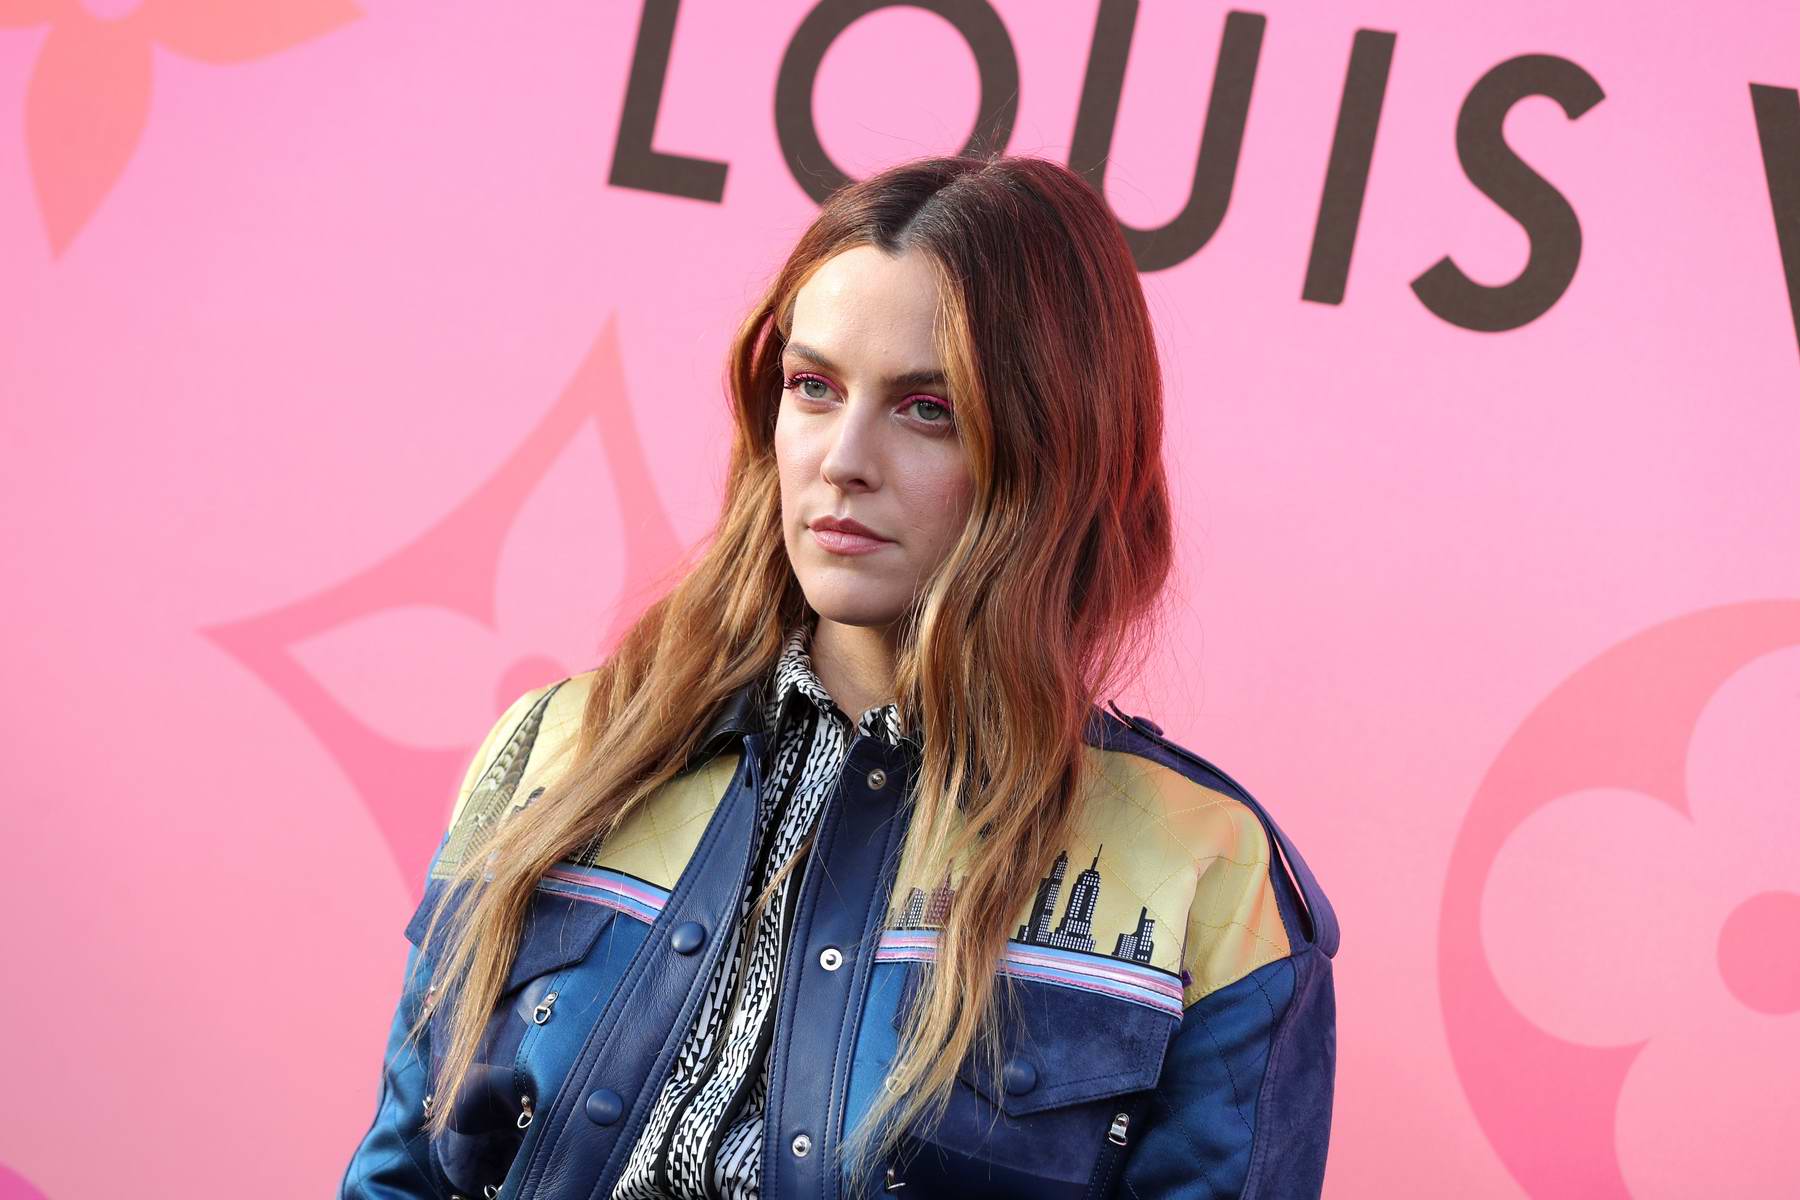 Riley Keough Louis Vuitton X Opening Cocktail June 27, 2019 – Star Style